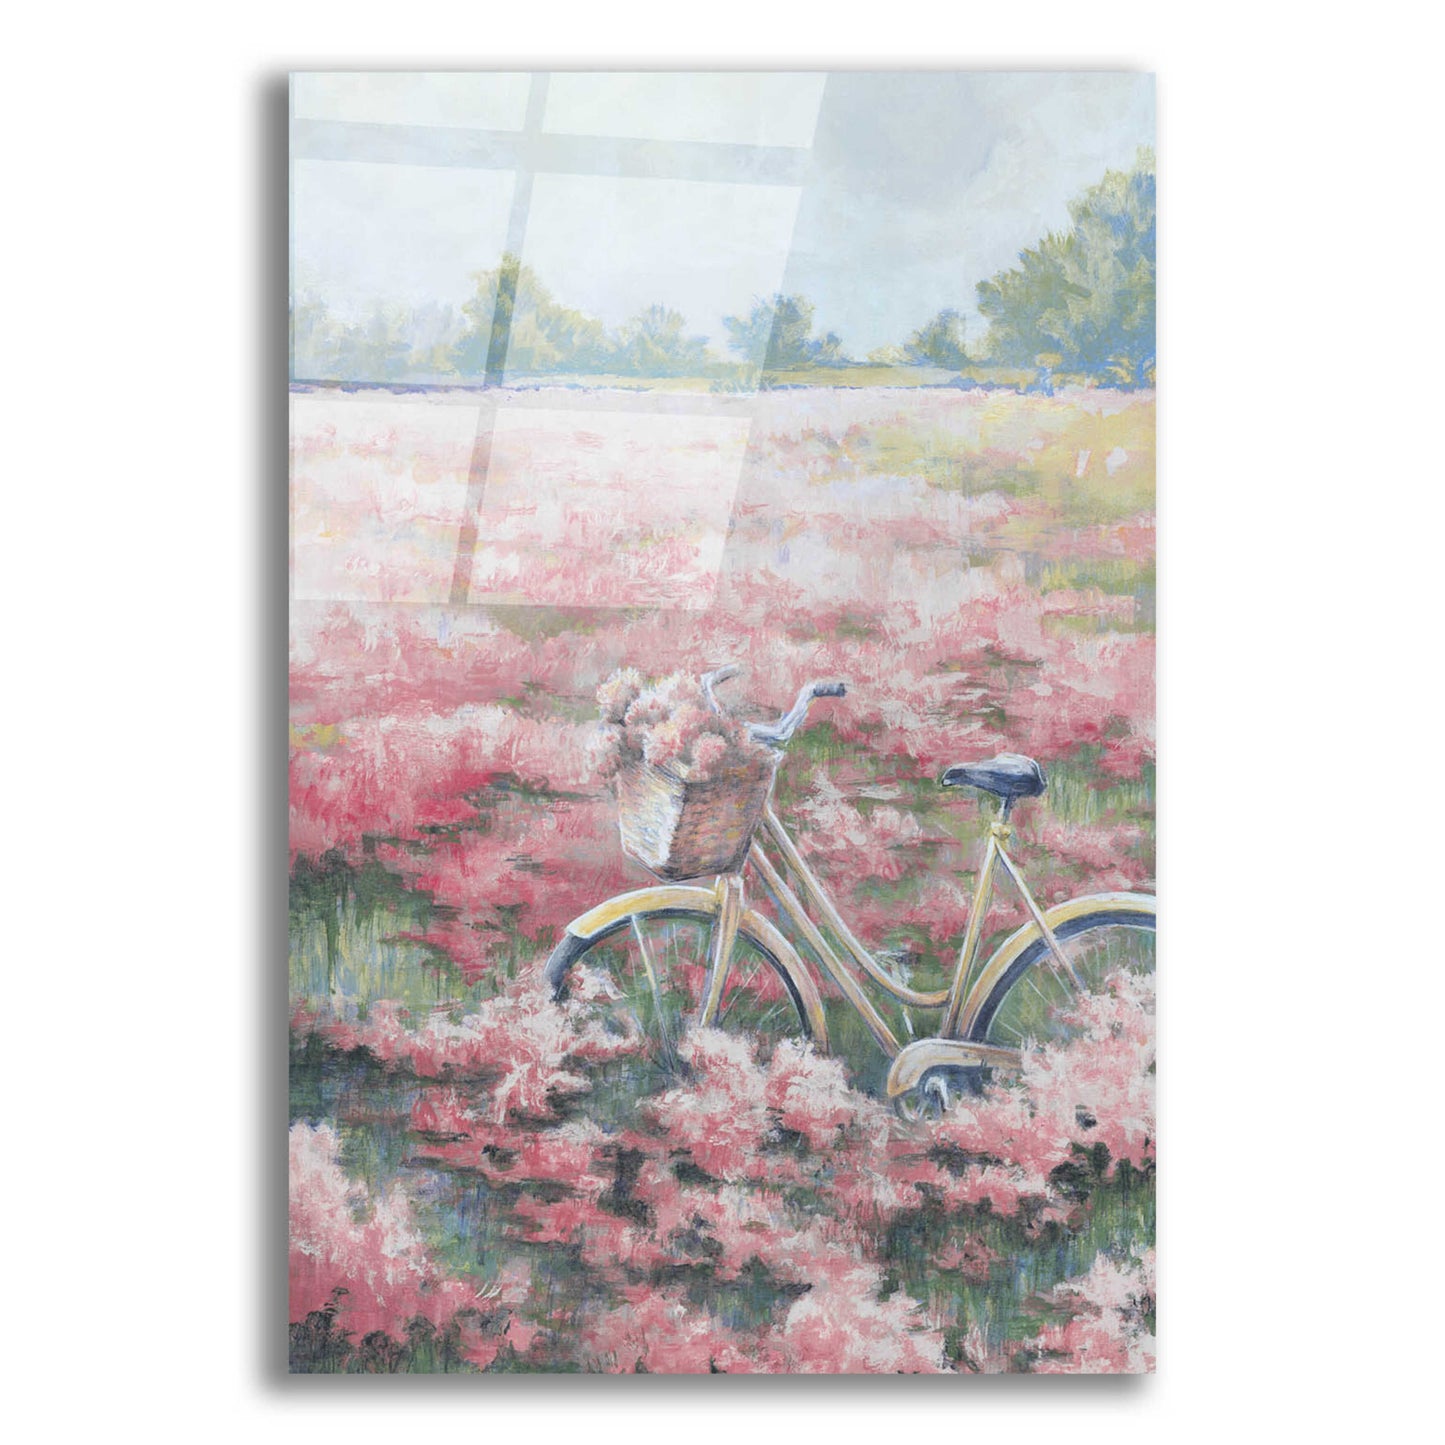 Epic Art 'Field Of Flowers' by White Ladder, Acrylic Glass Wall Art,16x24